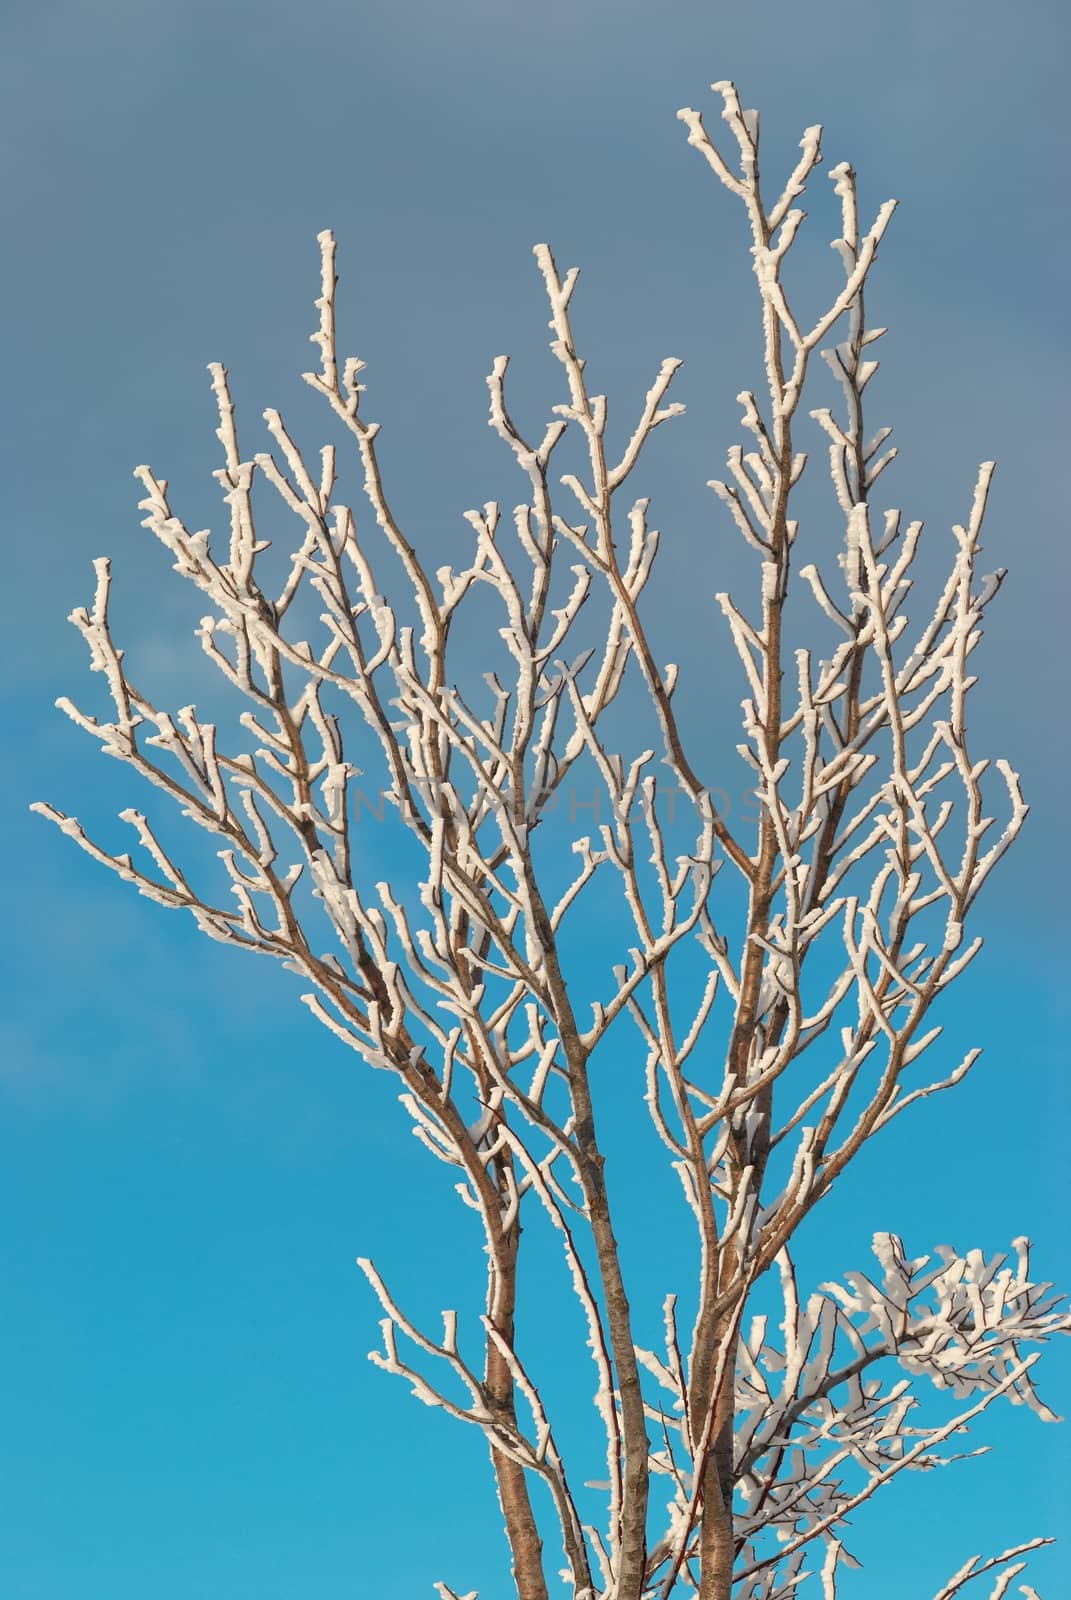 The Ice covered branch with blue sky.